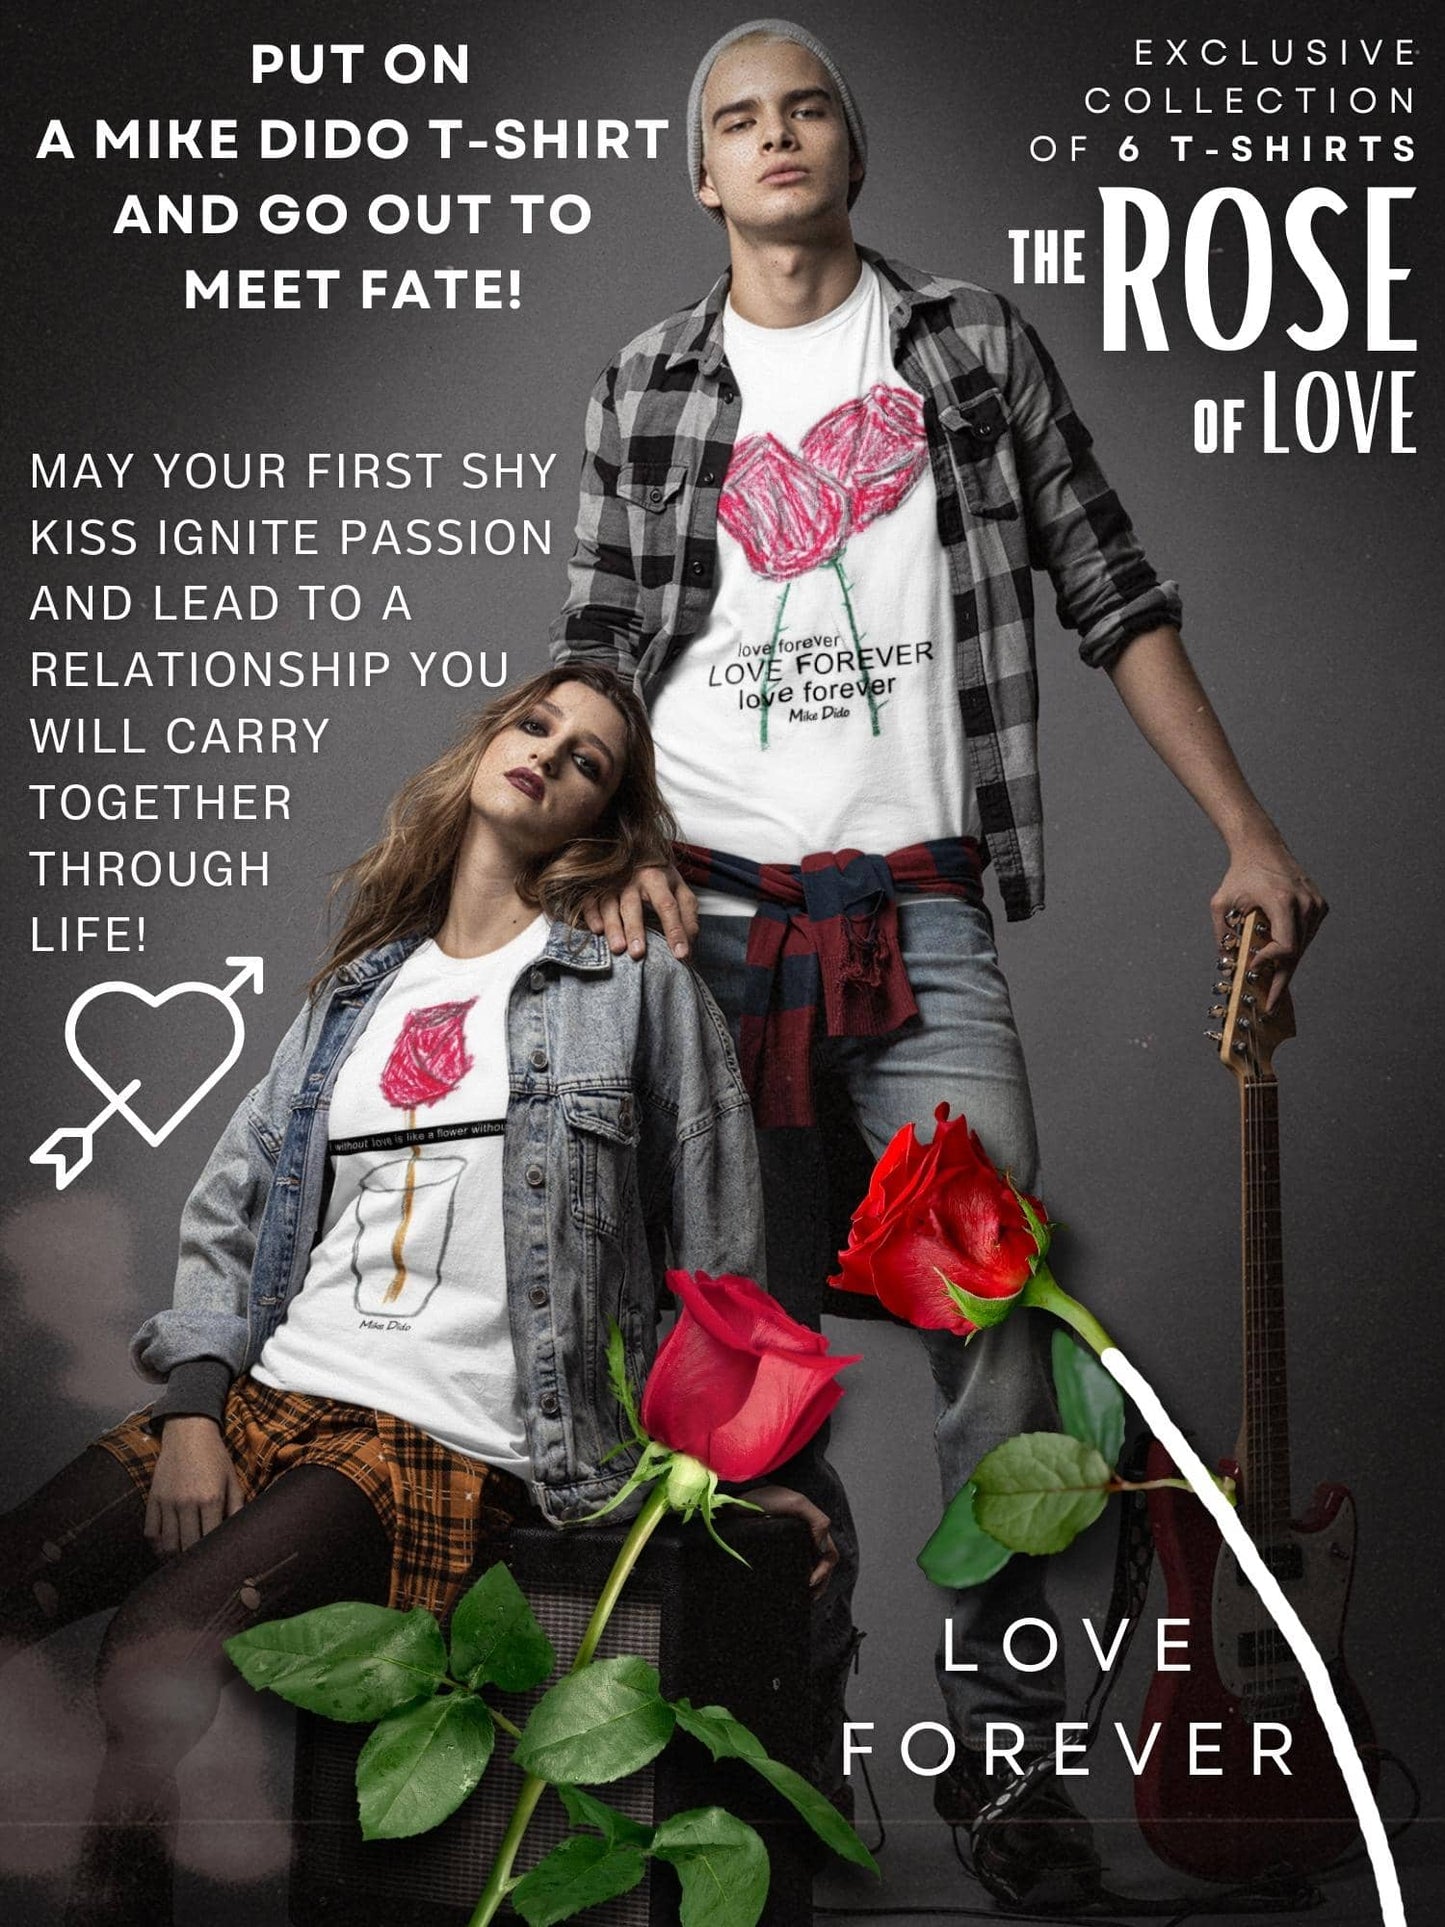 White Graphic Tee Red Rose Flower Forever Love by Mike Dido